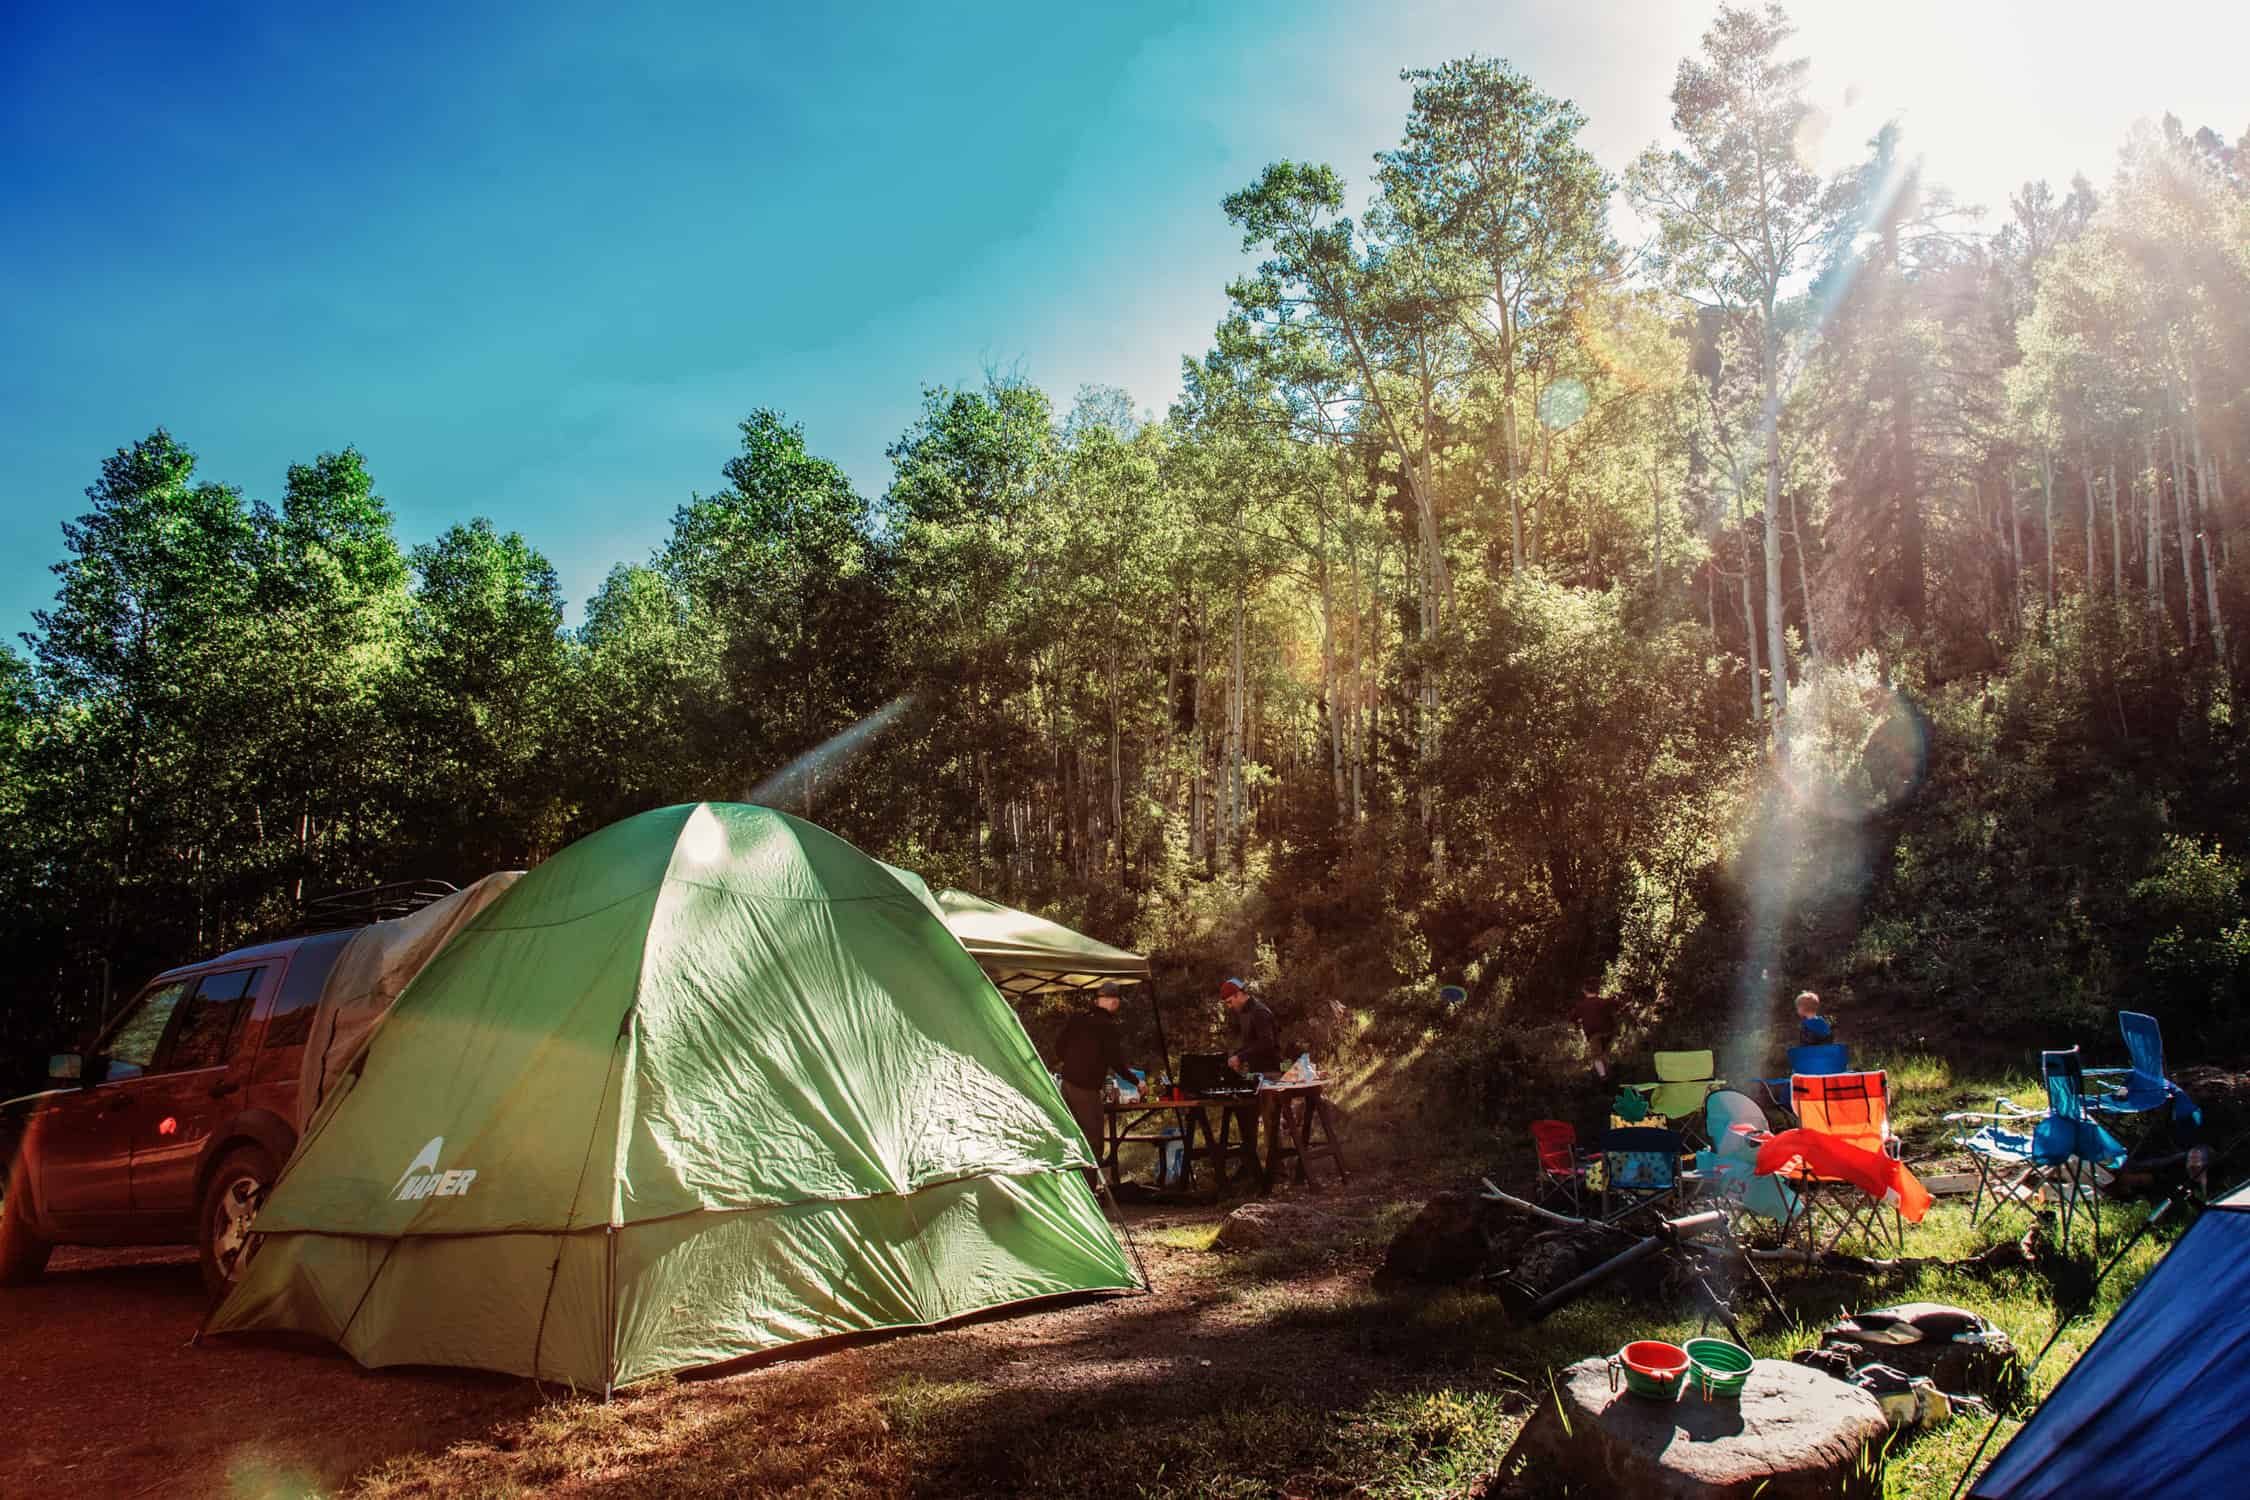 Ultimate Camping Gear List for Families • RUN WILD MY CHILD